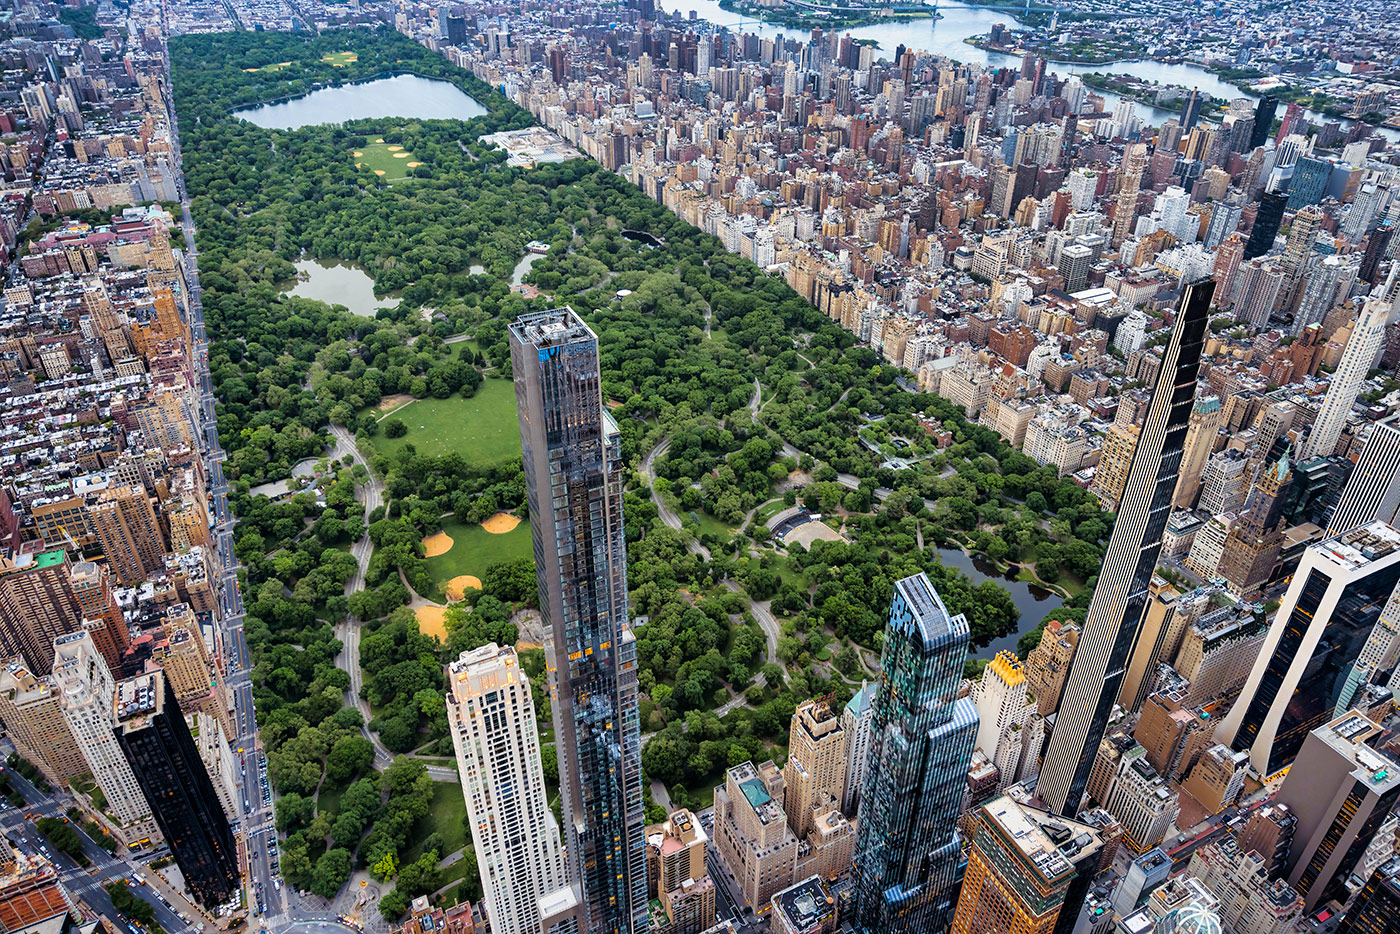 High above Central Park in NYC